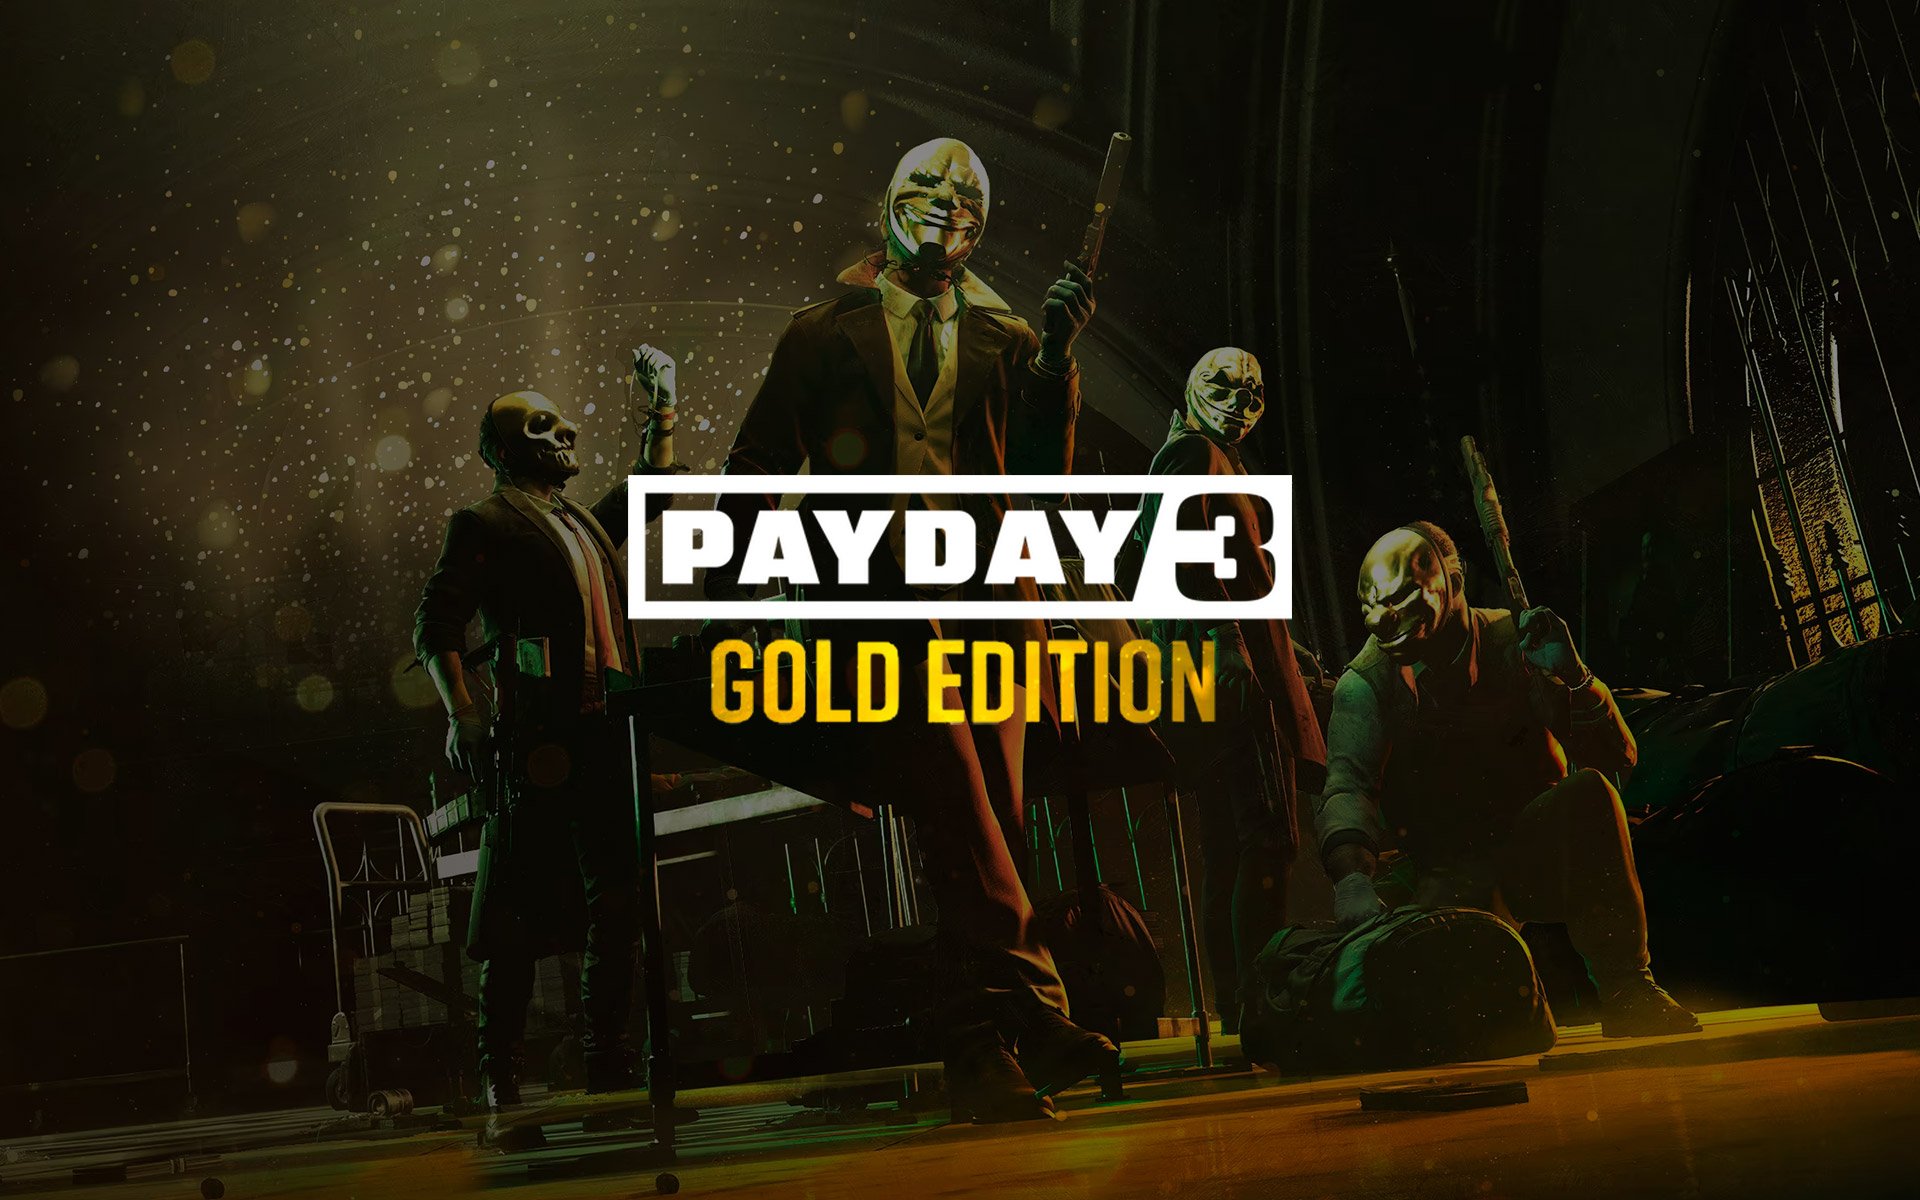 PAYDAY 3 - GOLD EDITION - PC - Compre na Nuuvem